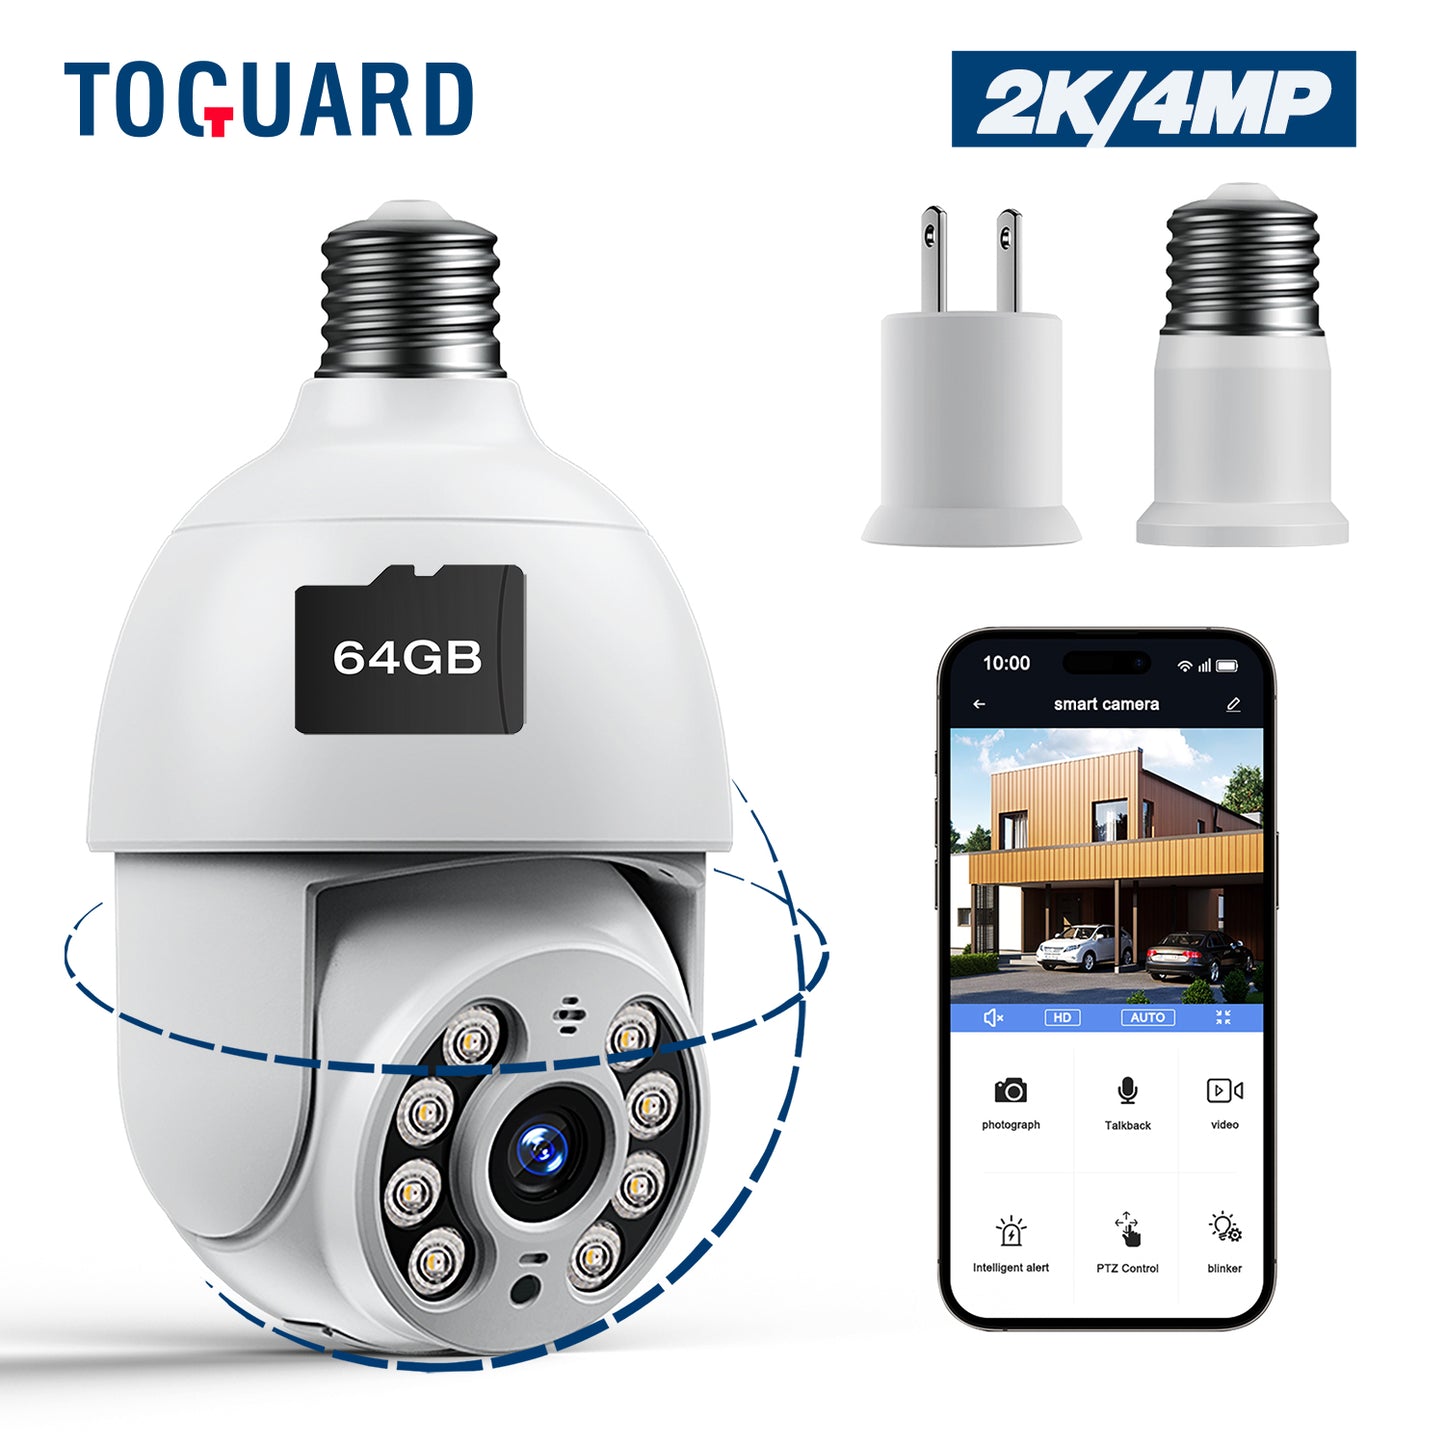 TOGUARD Wireless Security Camera with PIR Motion Detection